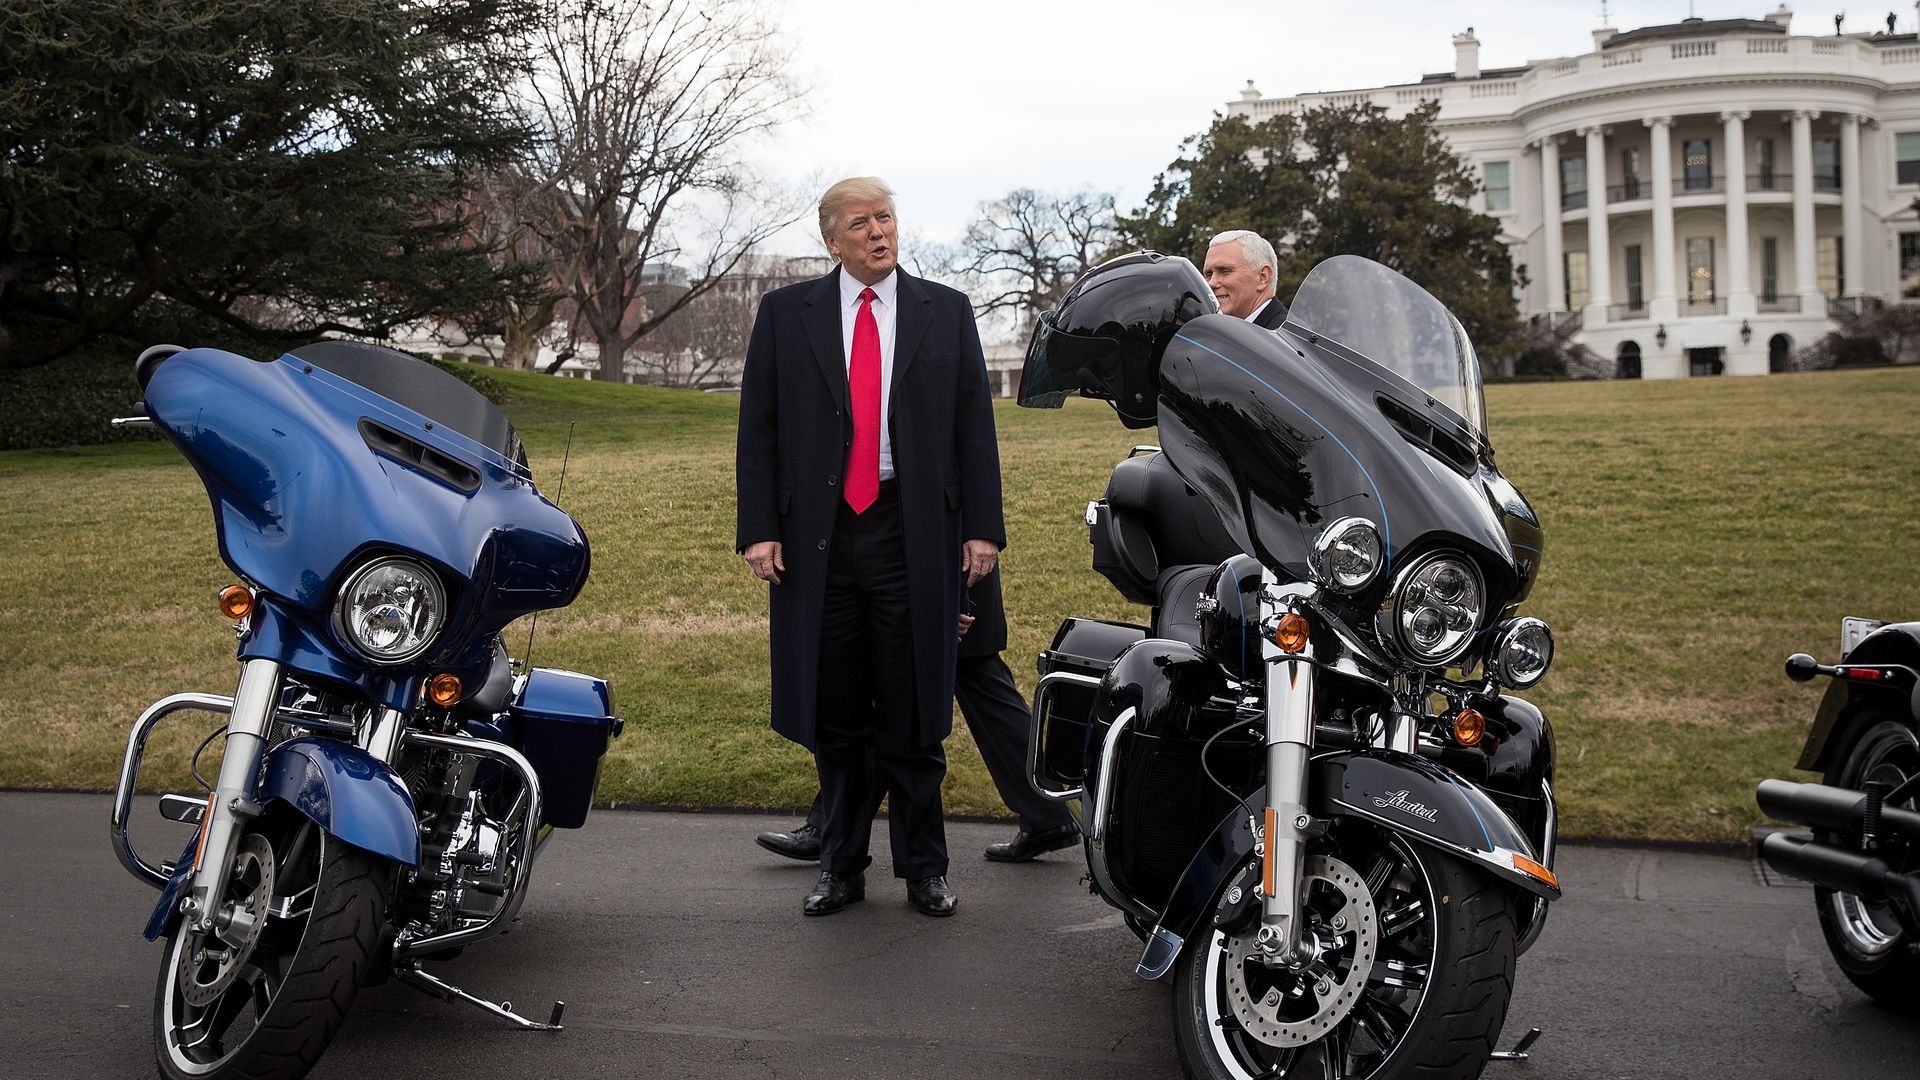 In this image, President Trump stands between two motorcycles on the White House lawn. 